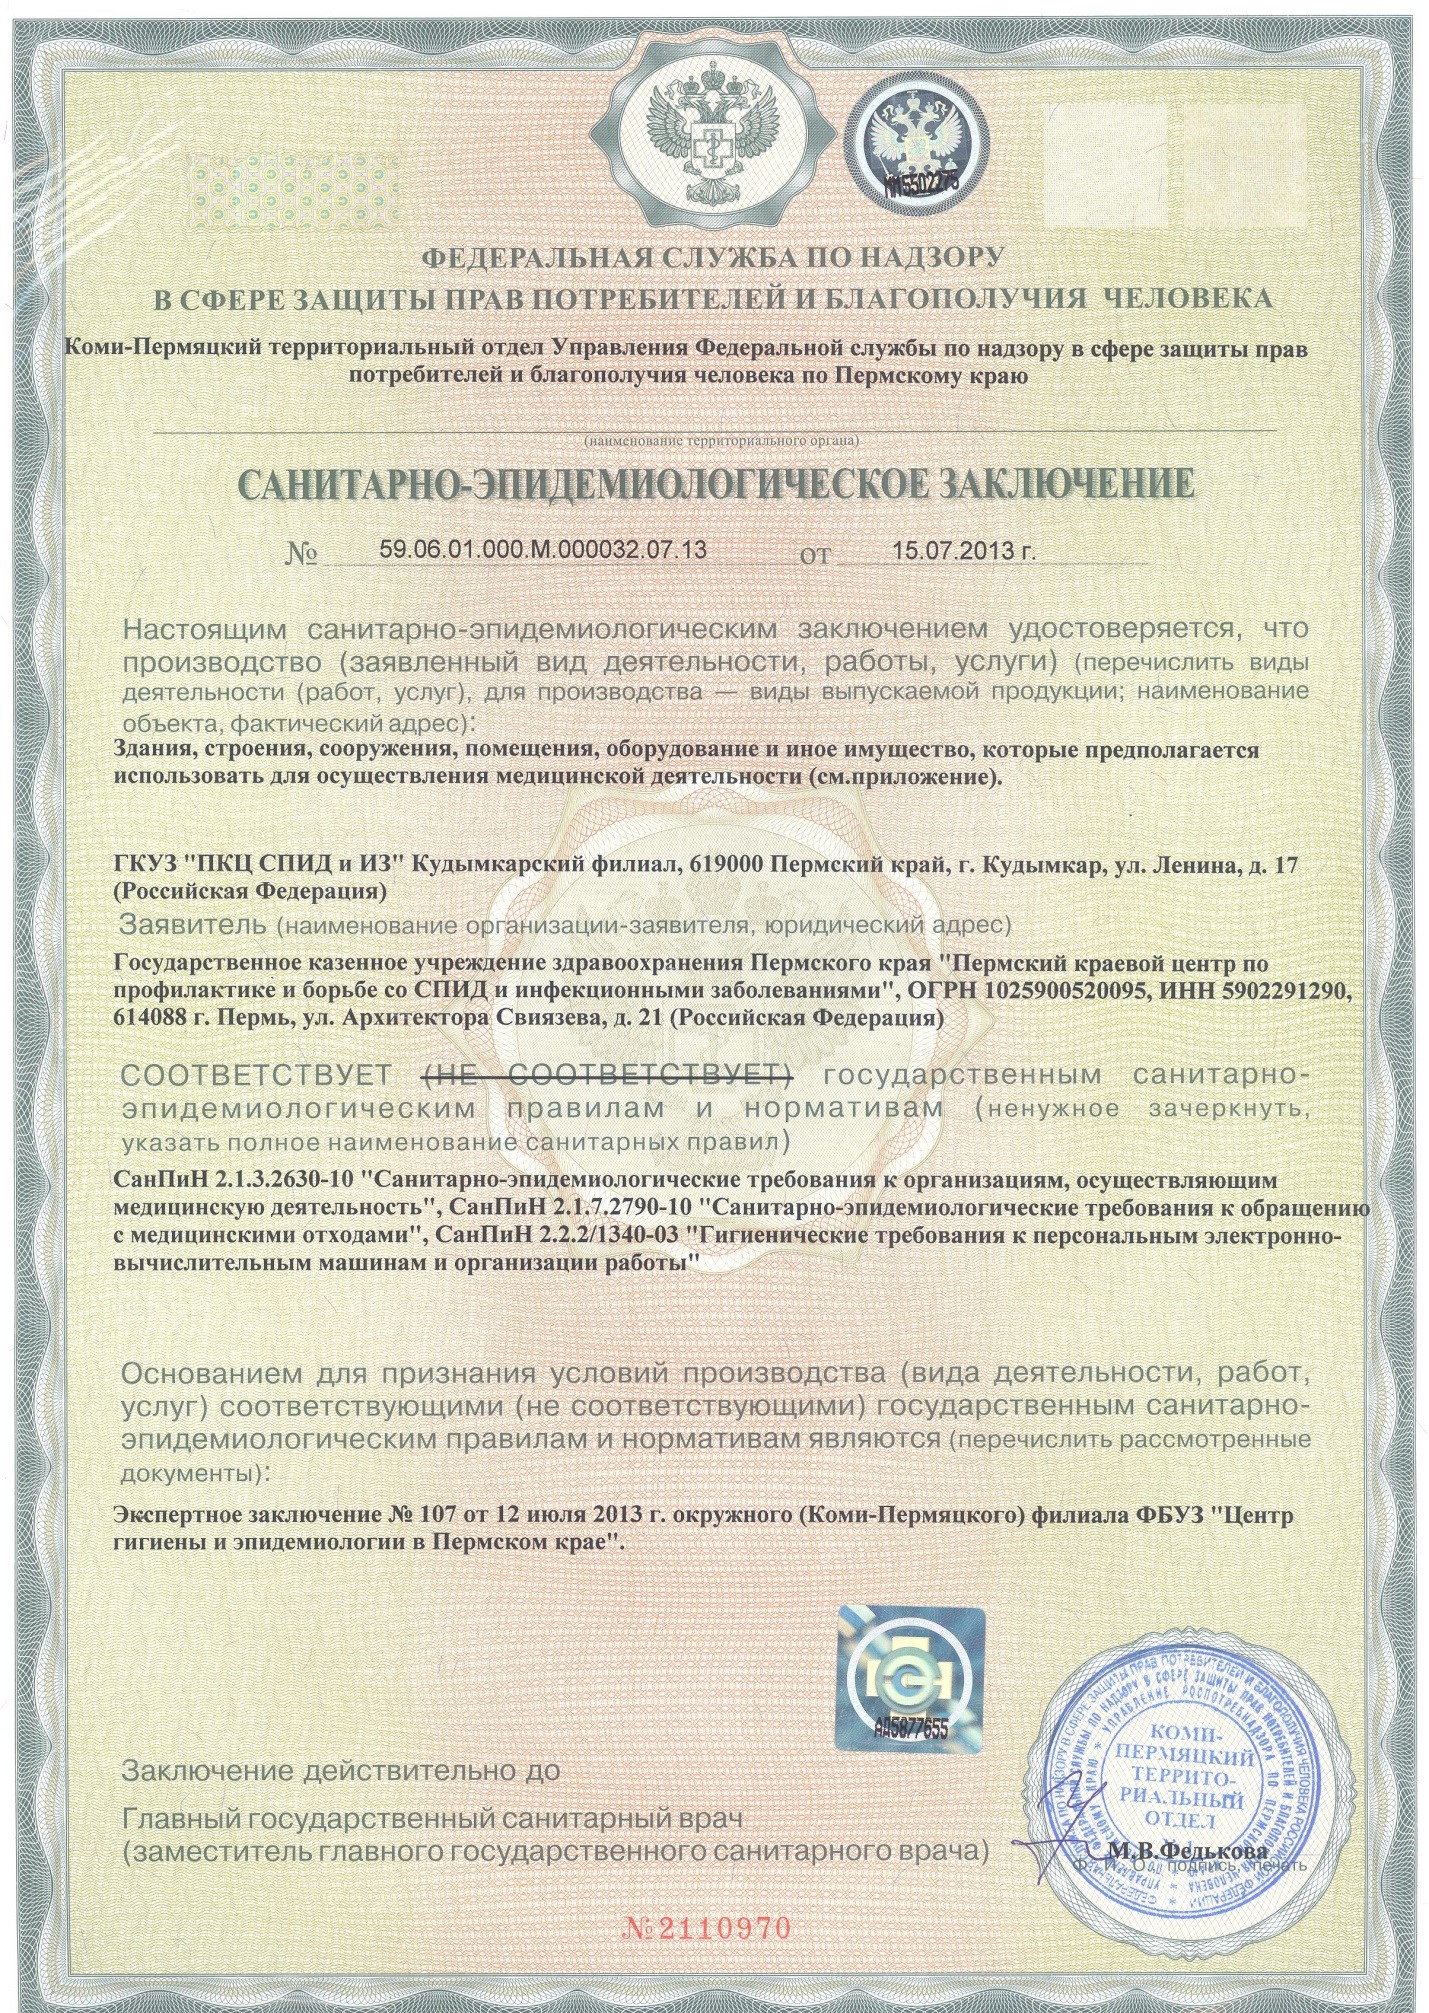 Sanitary-epidemiological certificate8